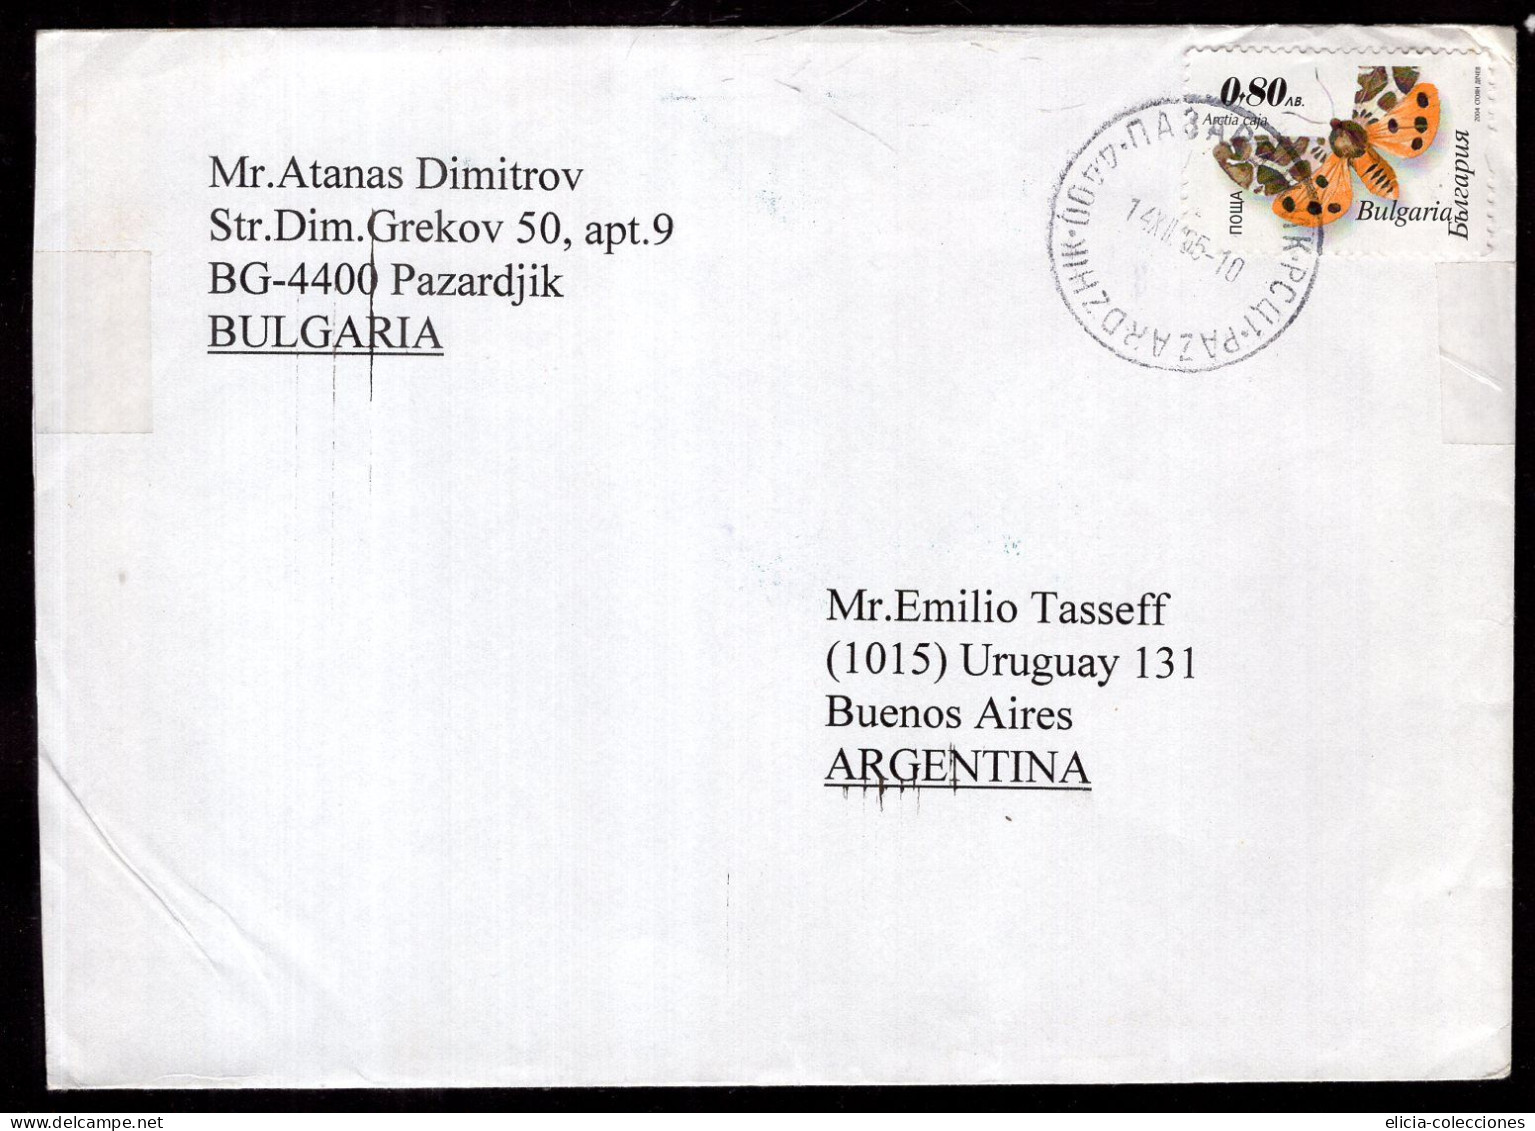 Bulgaria - 2005 - Letter - Sent From Pazardjik To Argentina - Caja 30 - Covers & Documents